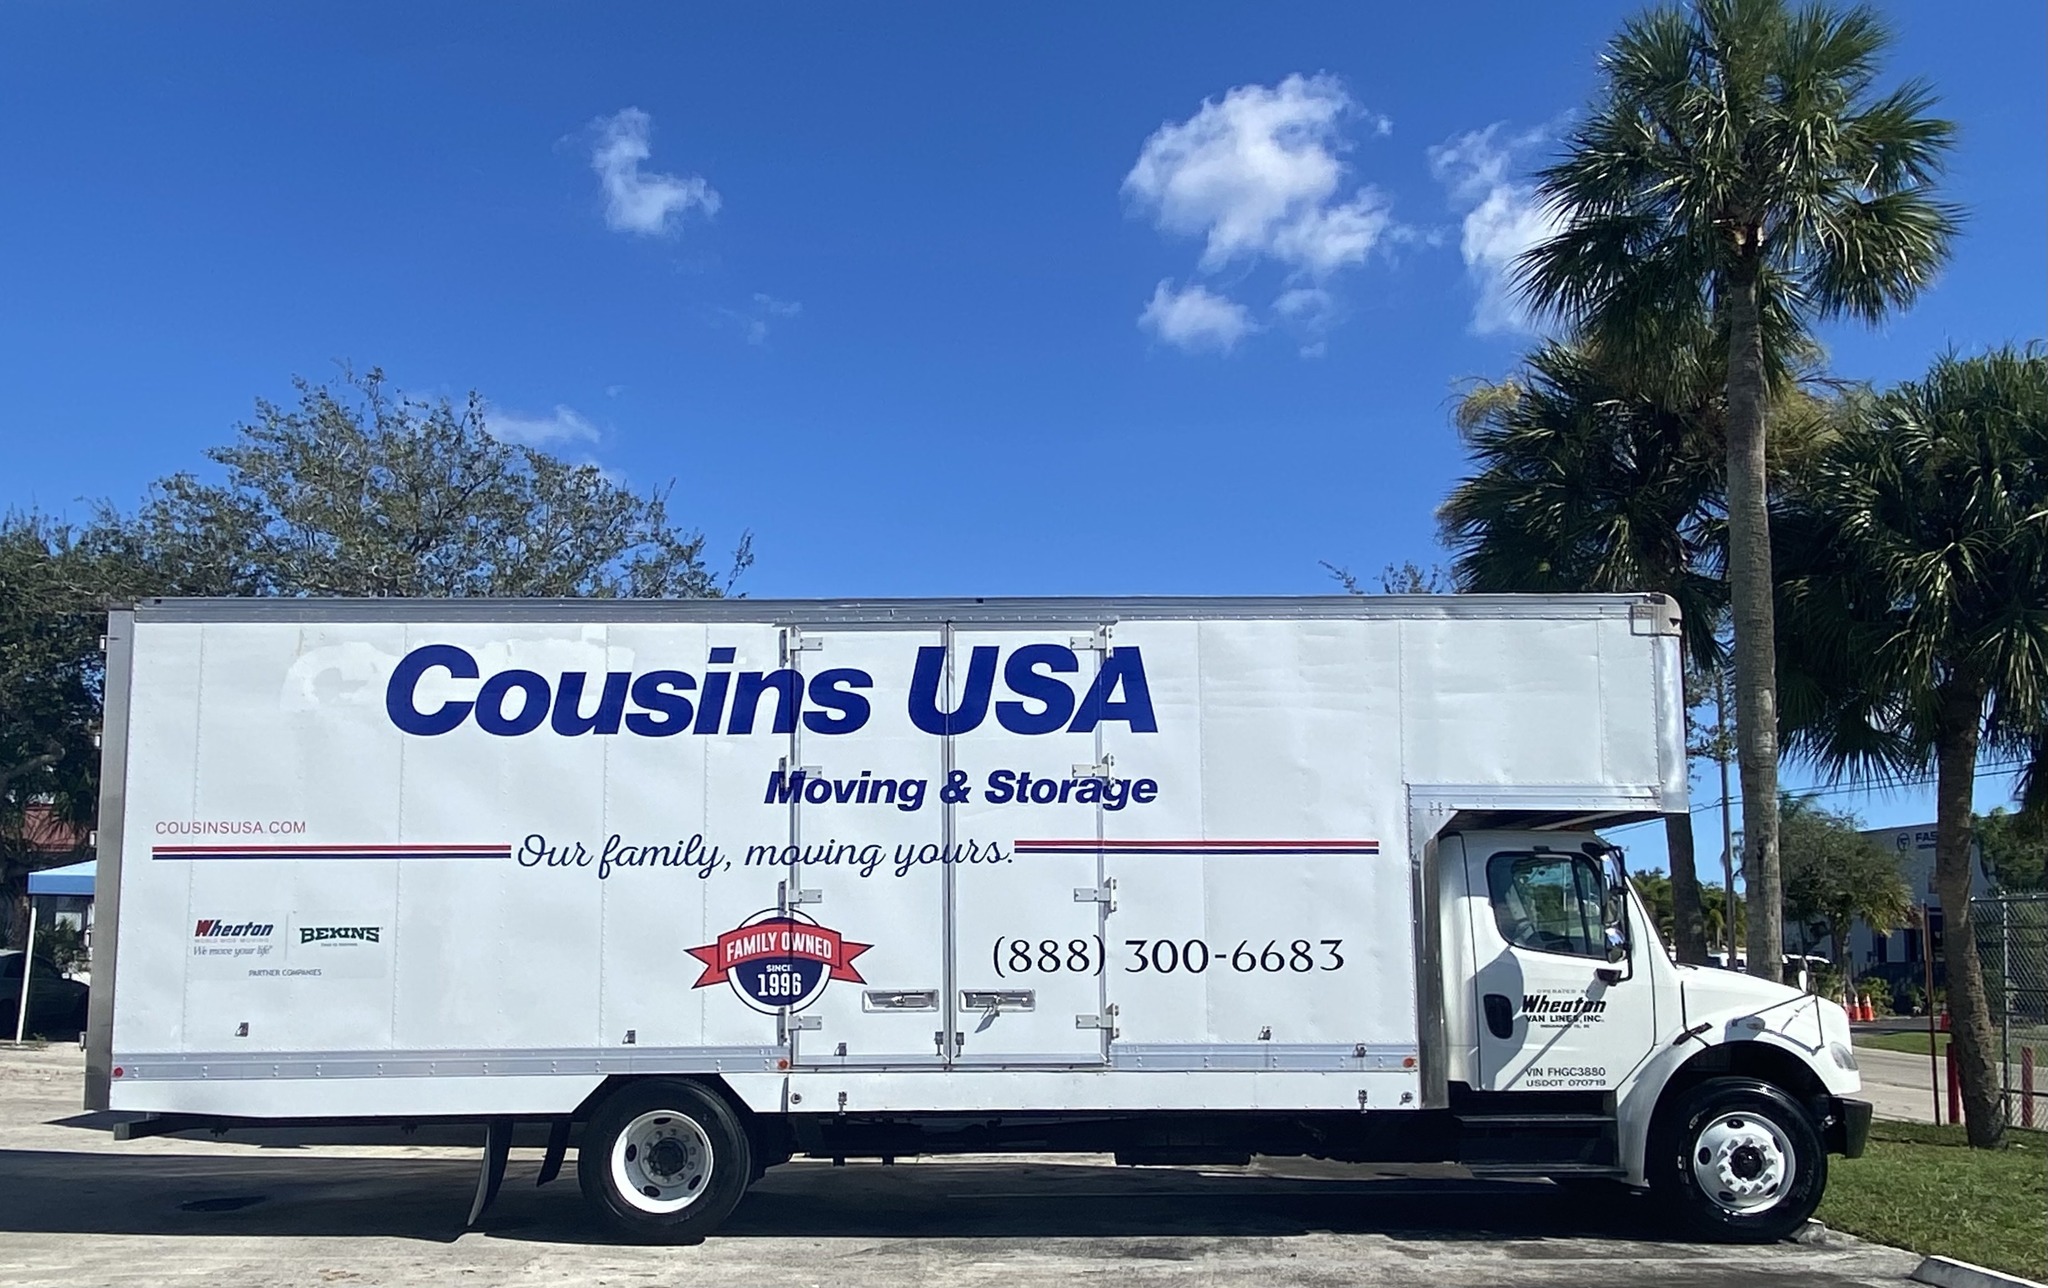 Cousins USA Moving & Storage Best Moving Company in Lauderhill